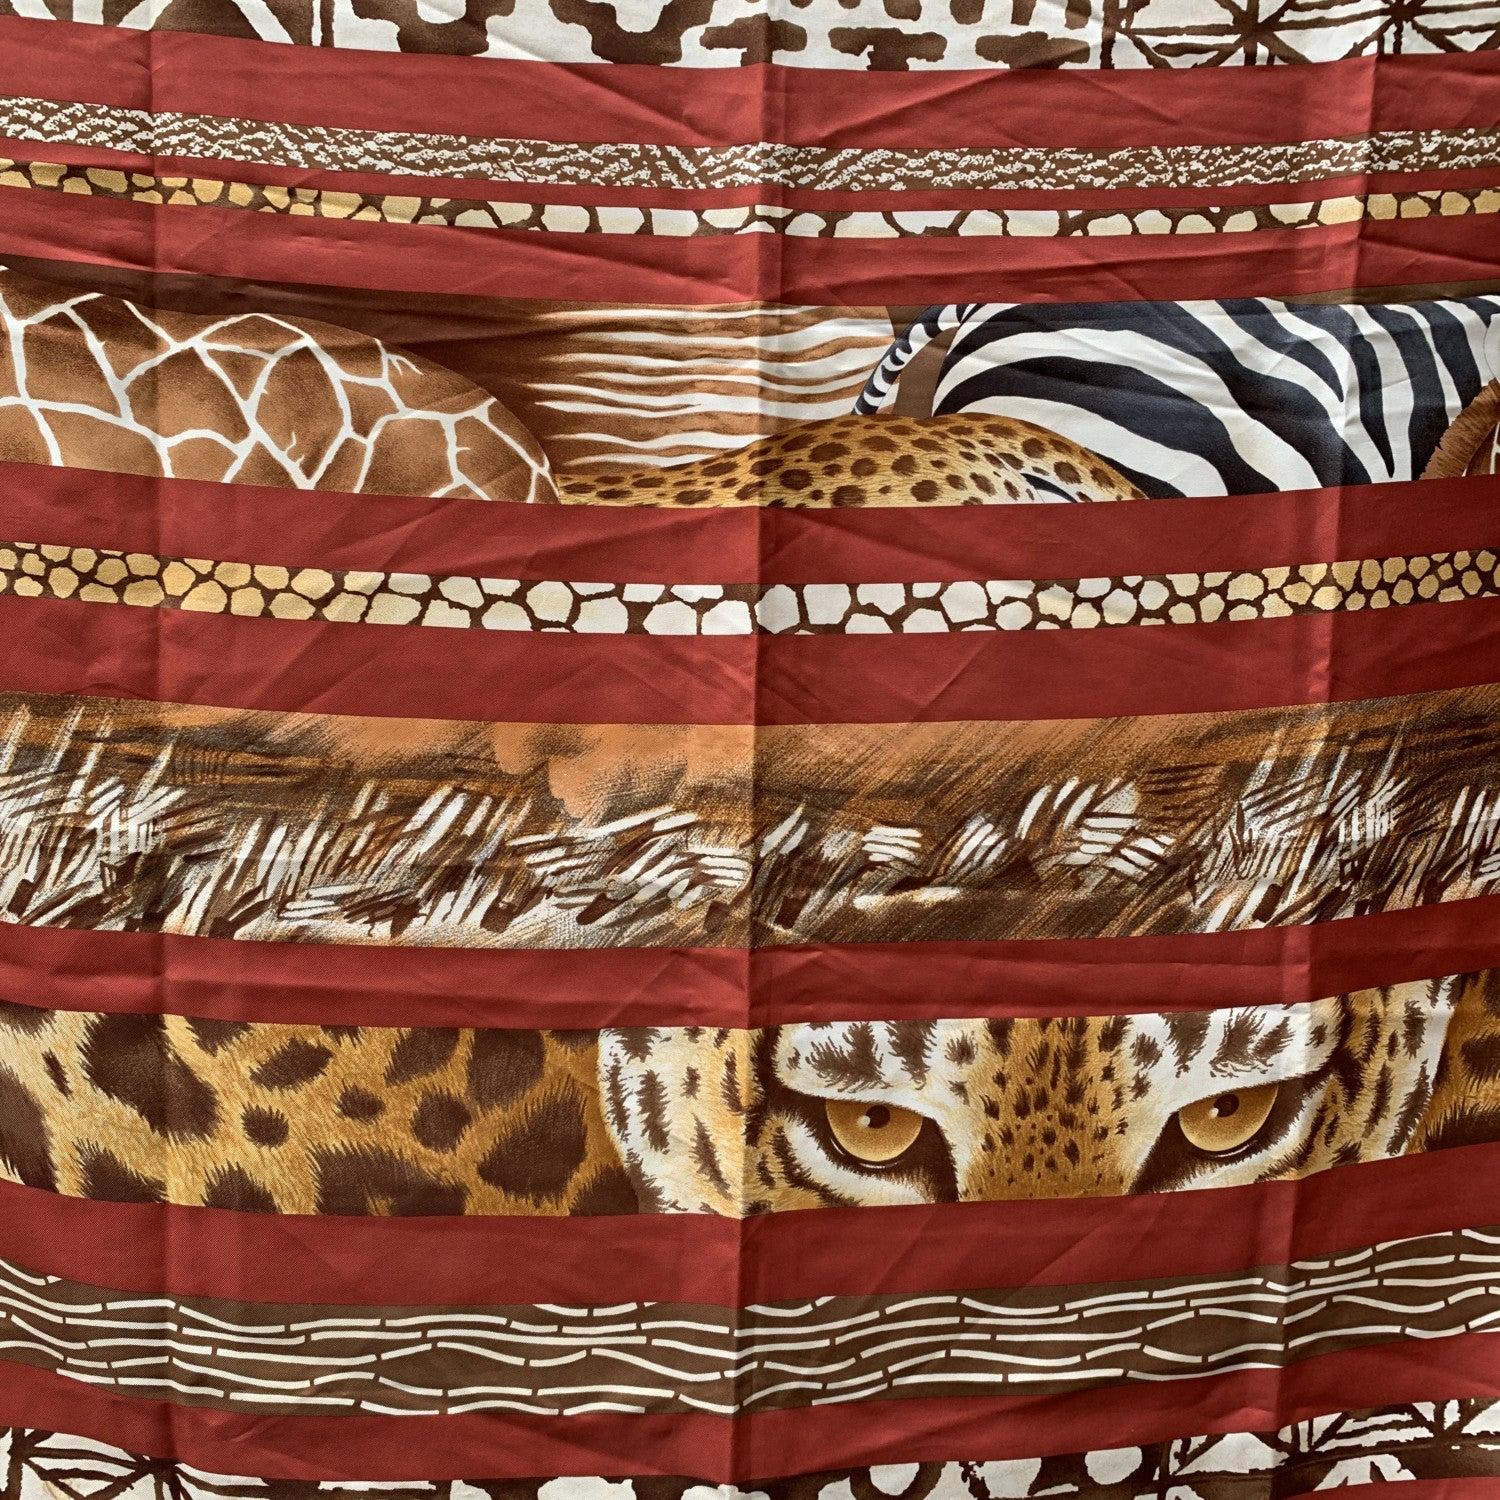 Vintage Salvatore Ferragamo brown silk scarf. Animalier print with brown striped pattern. Hand rolled edges. Made in Italy. Composition: 100% silk. Approx. measurements: 34.5 x 34.5 inches - 87.5 x 87.5 cm. 'Salvatore Ferragamo' signature printed on